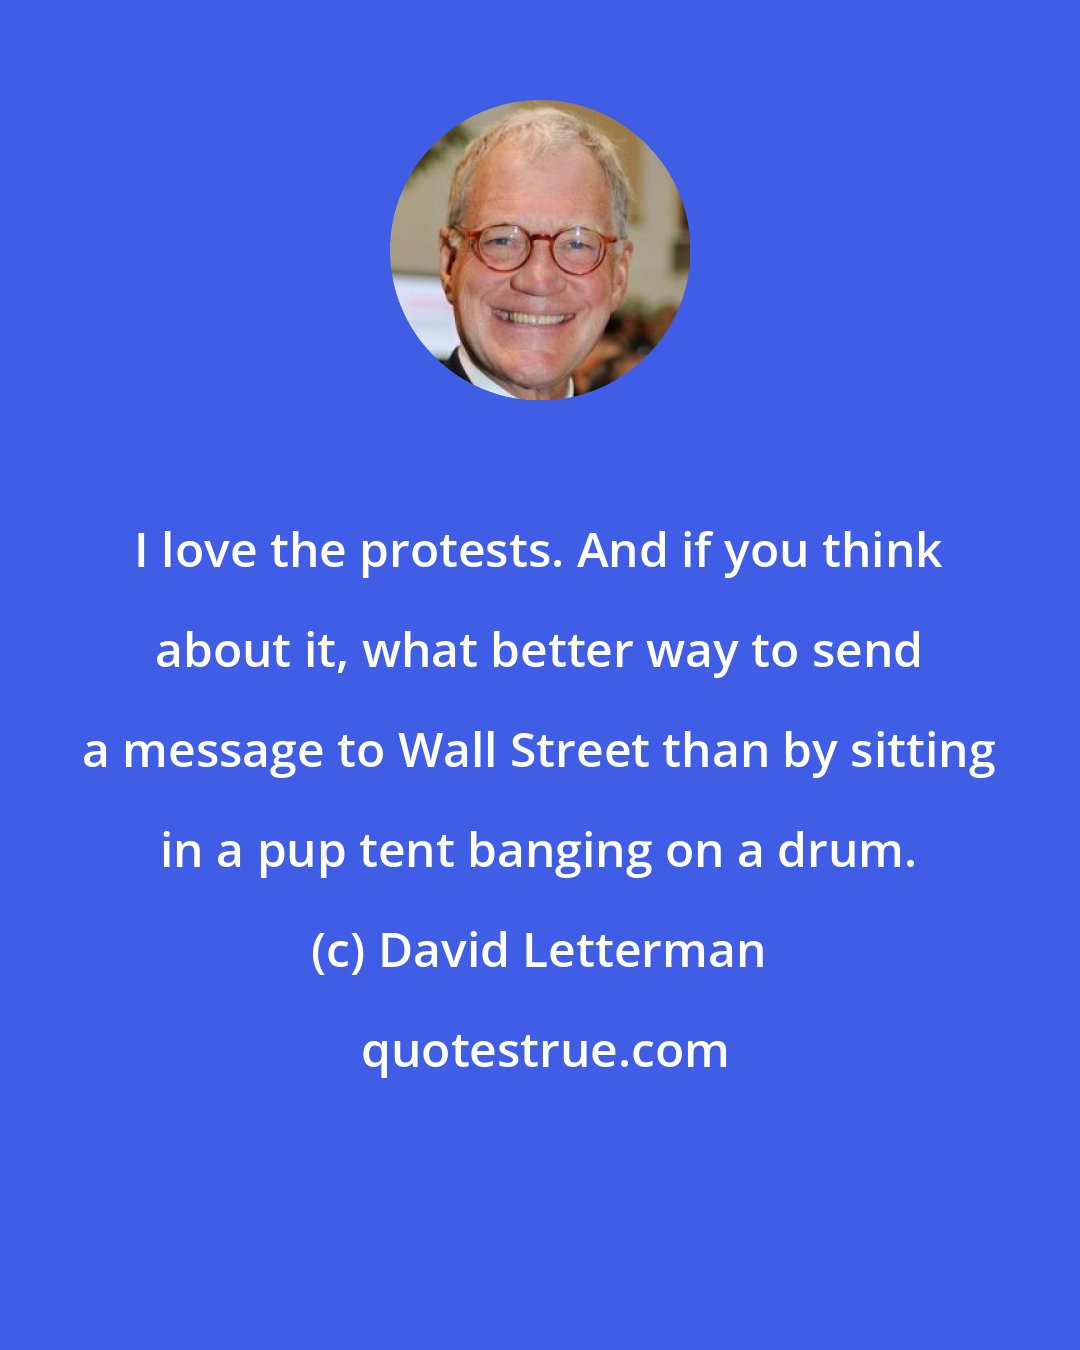 David Letterman: I love the protests. And if you think about it, what better way to send a message to Wall Street than by sitting in a pup tent banging on a drum.